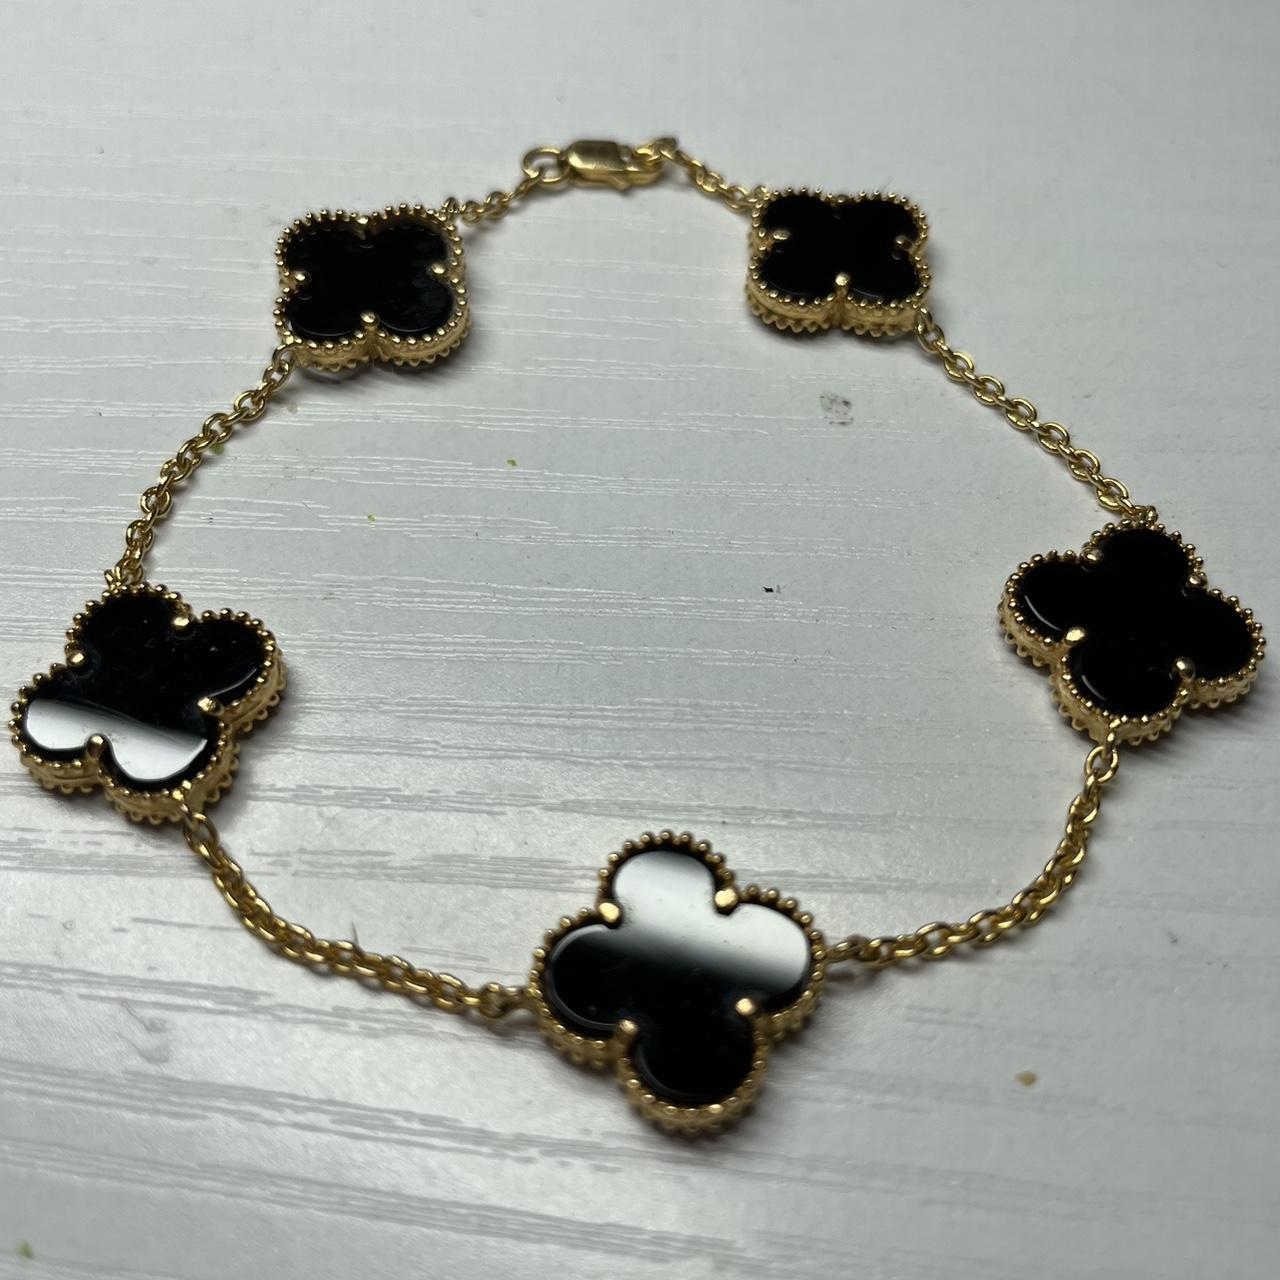 Kendra scott gold star necklace with double - Depop